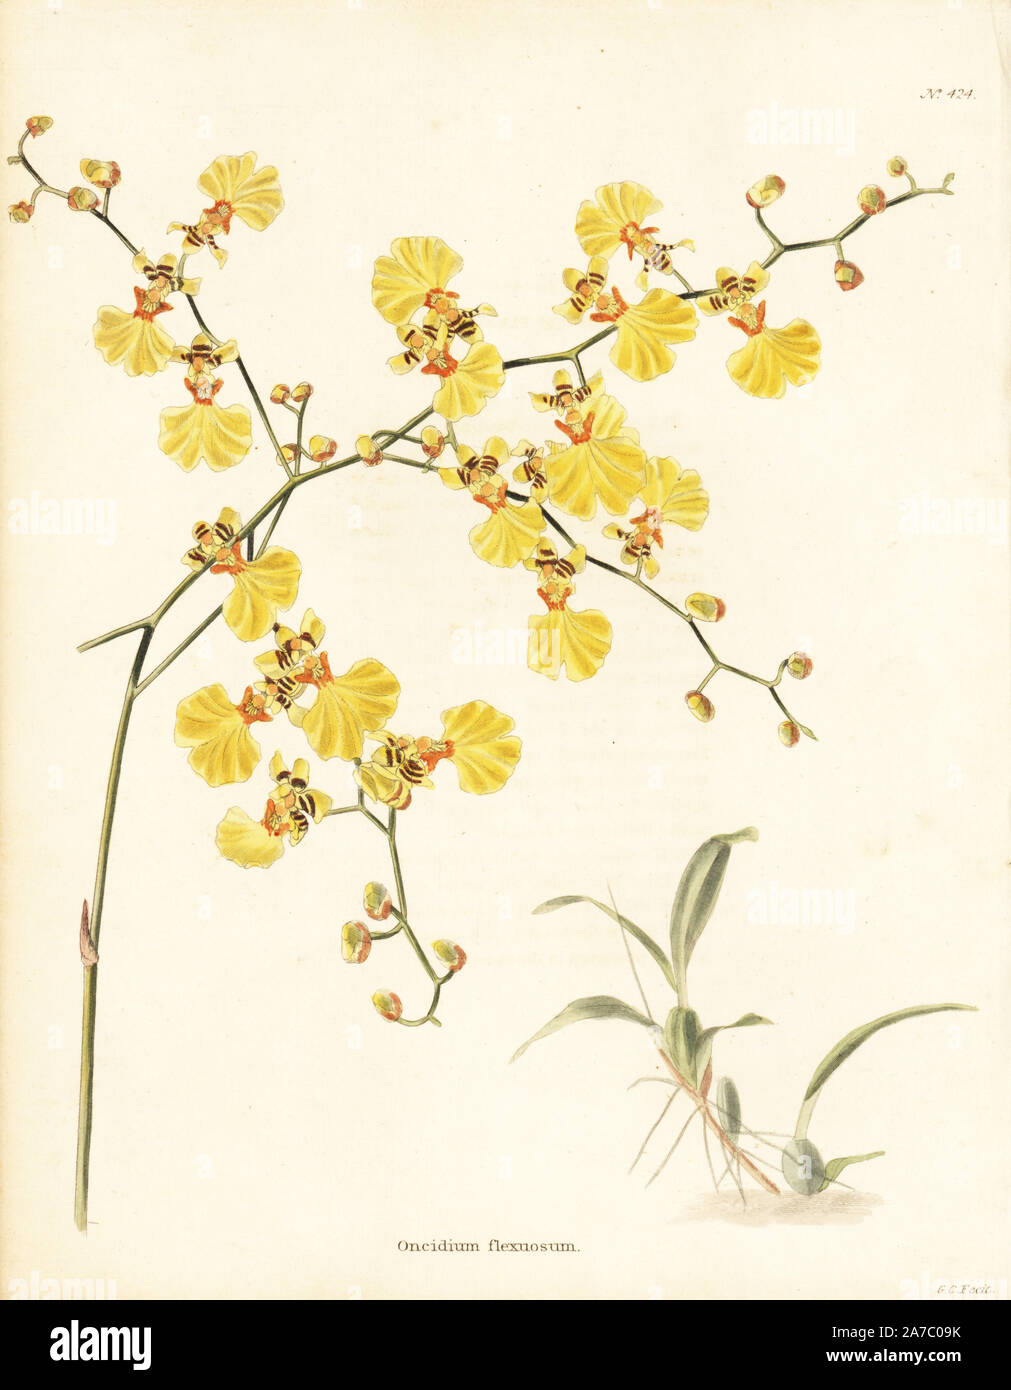 Golden shower orchid, Oncidium flexuosum. Handcoloured copperplate engraving by George Cooke from Conrad Loddiges' Botanical Cabinet, London, 1810. Stock Photo